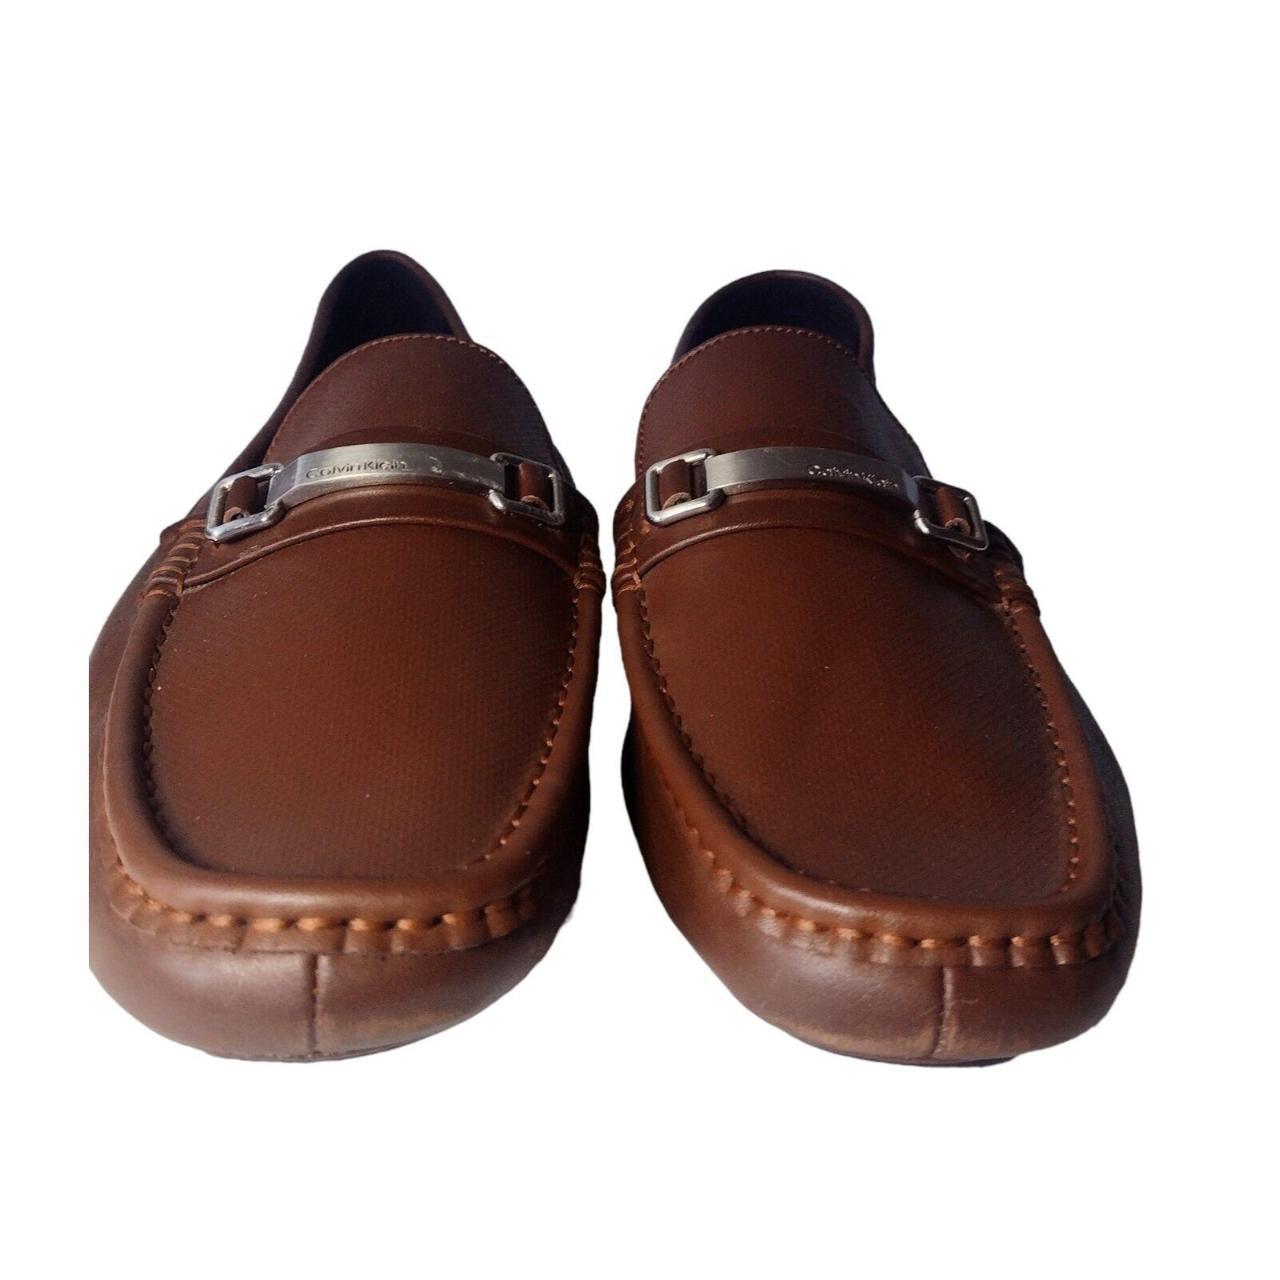 Calvin Klein Maddix Brown Leather Driving Shoes... - Depop